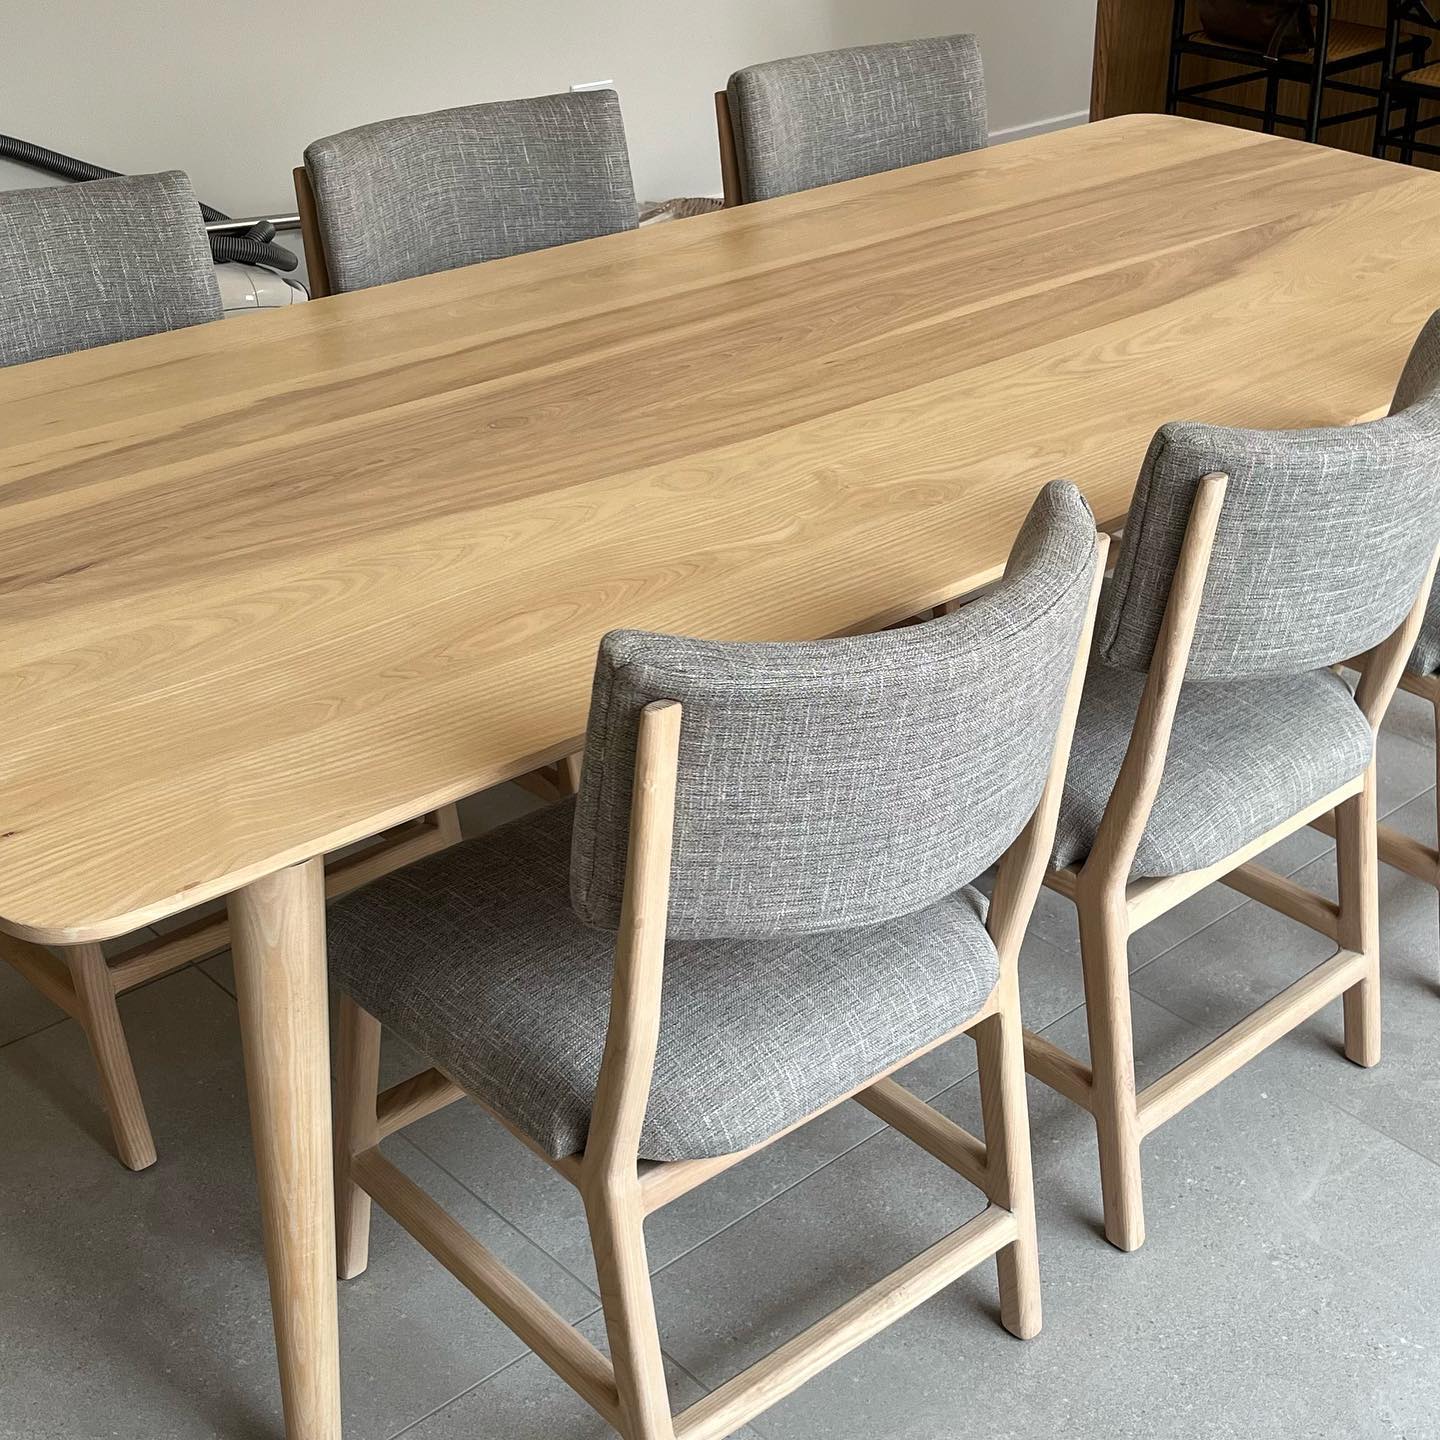 Dining table + chairs (1)